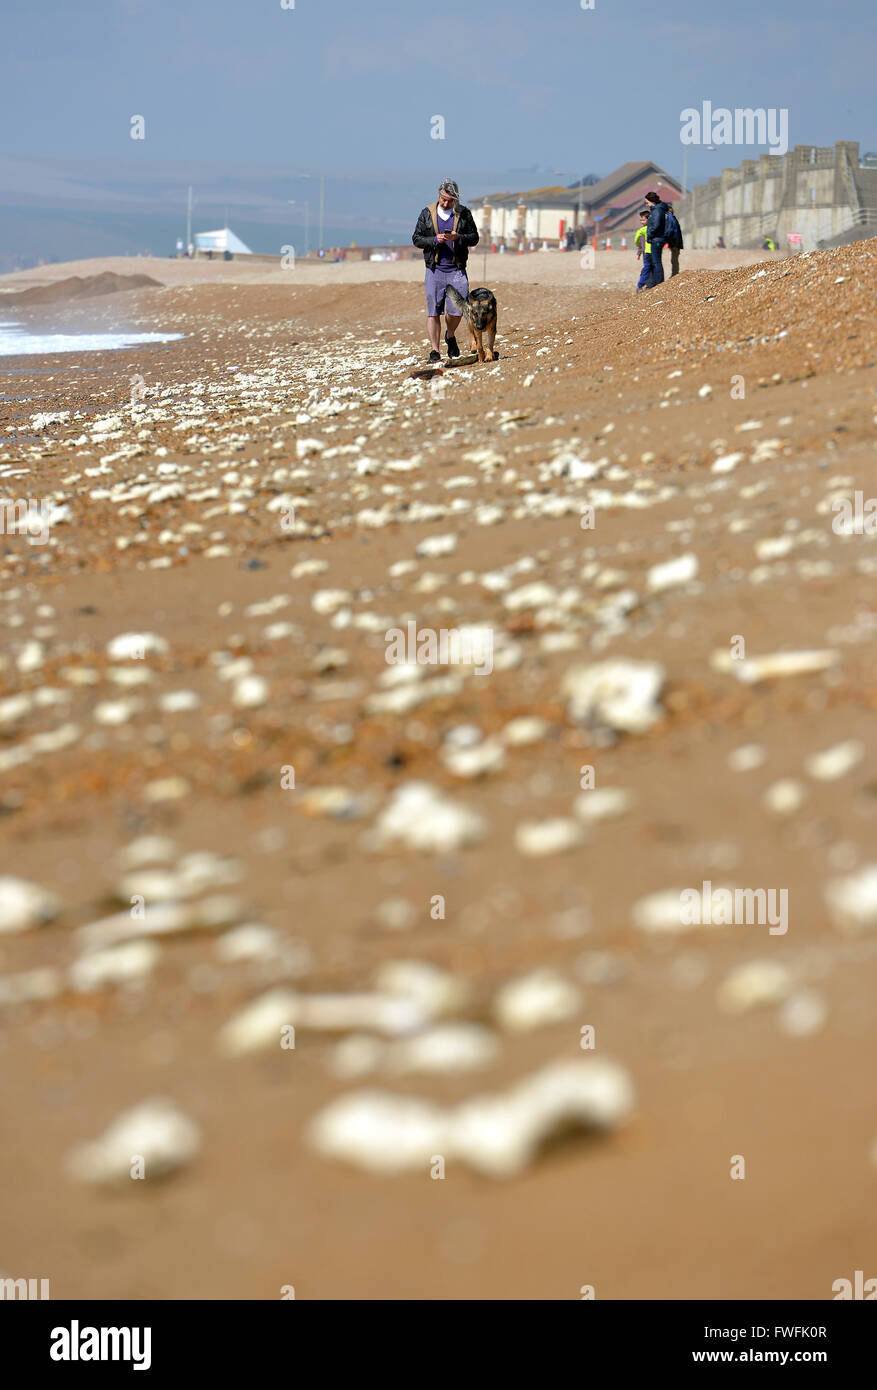 Palm oil of 'fatbergs' washed up on UK beach. Seaford, UK Stock Photo